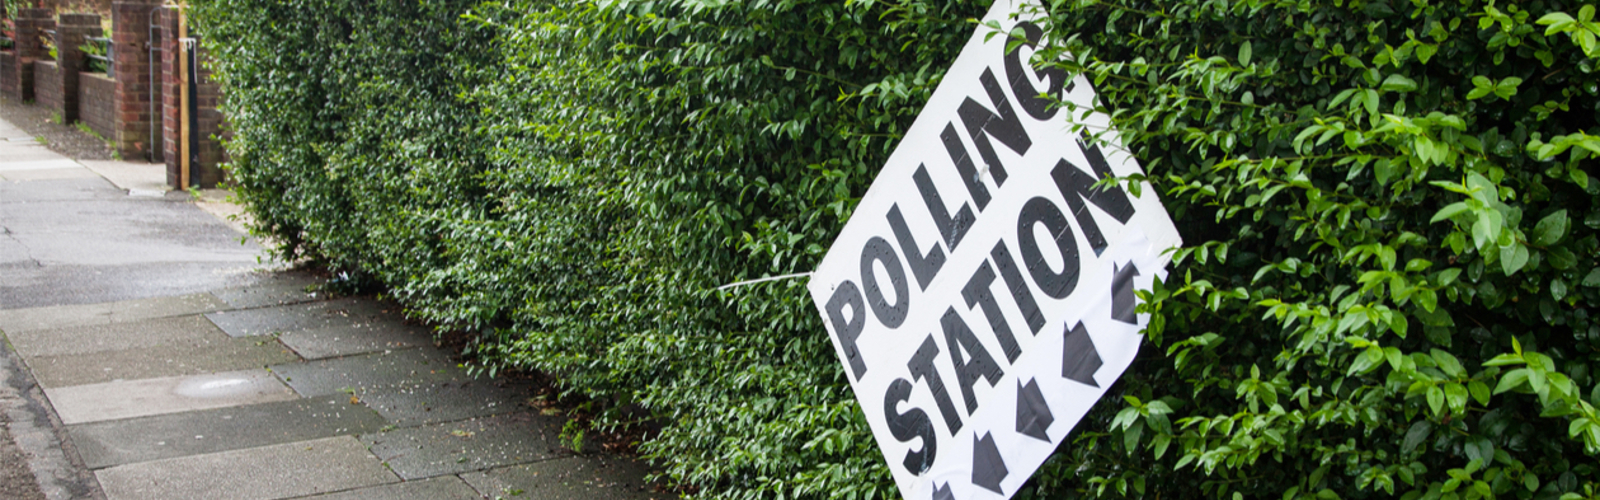 UK polling station sign, wonky against a green hedge